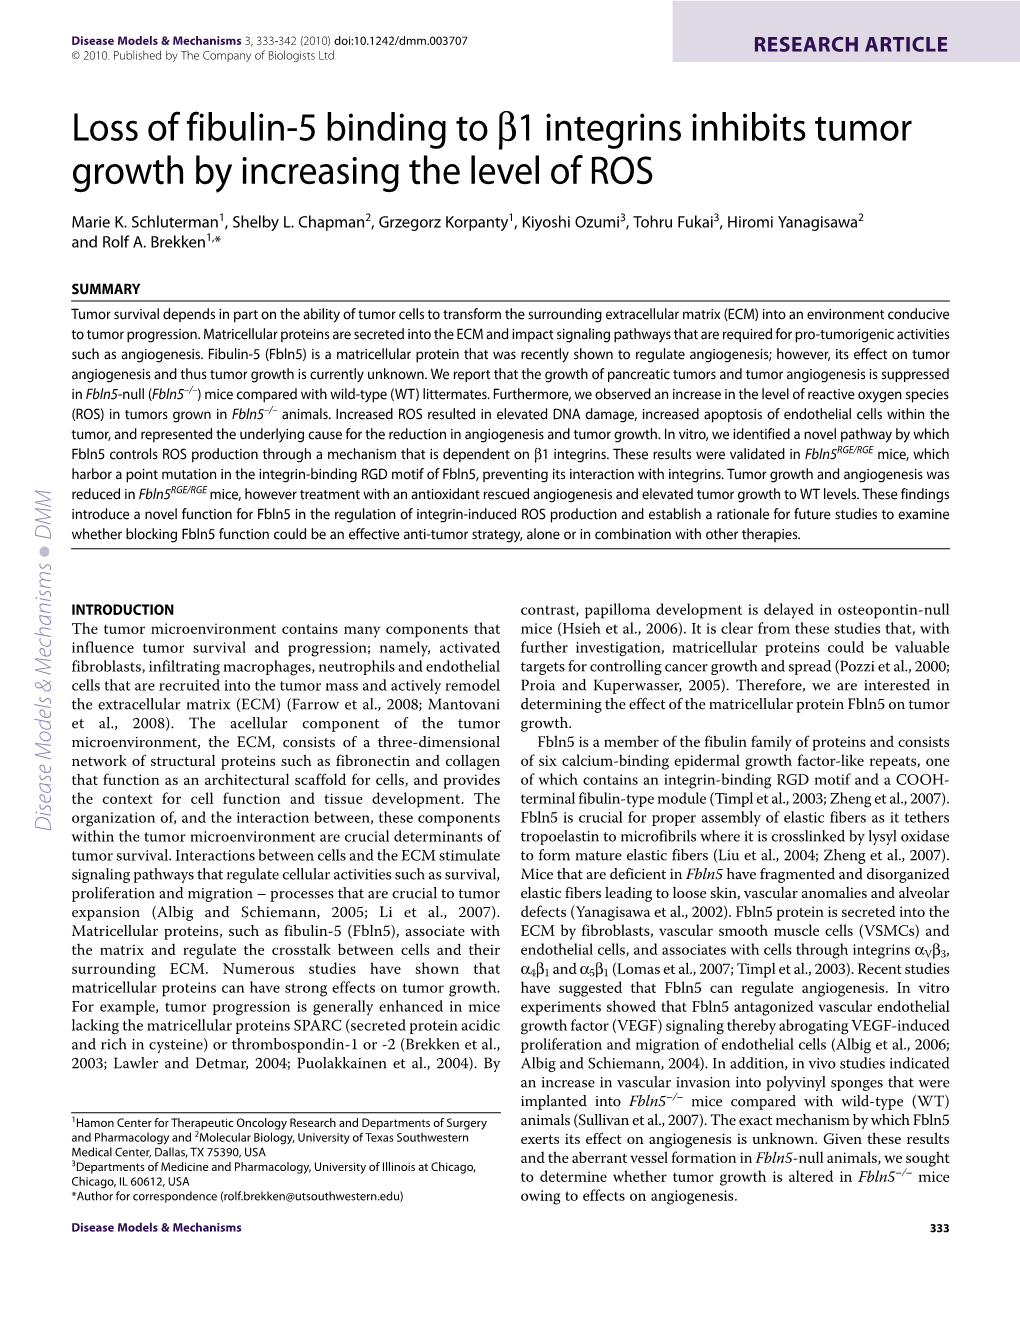 Loss of Fibulin-5 Binding to B1 Integrins Inhibits Tumor Growth by Increasing the Level of ROS